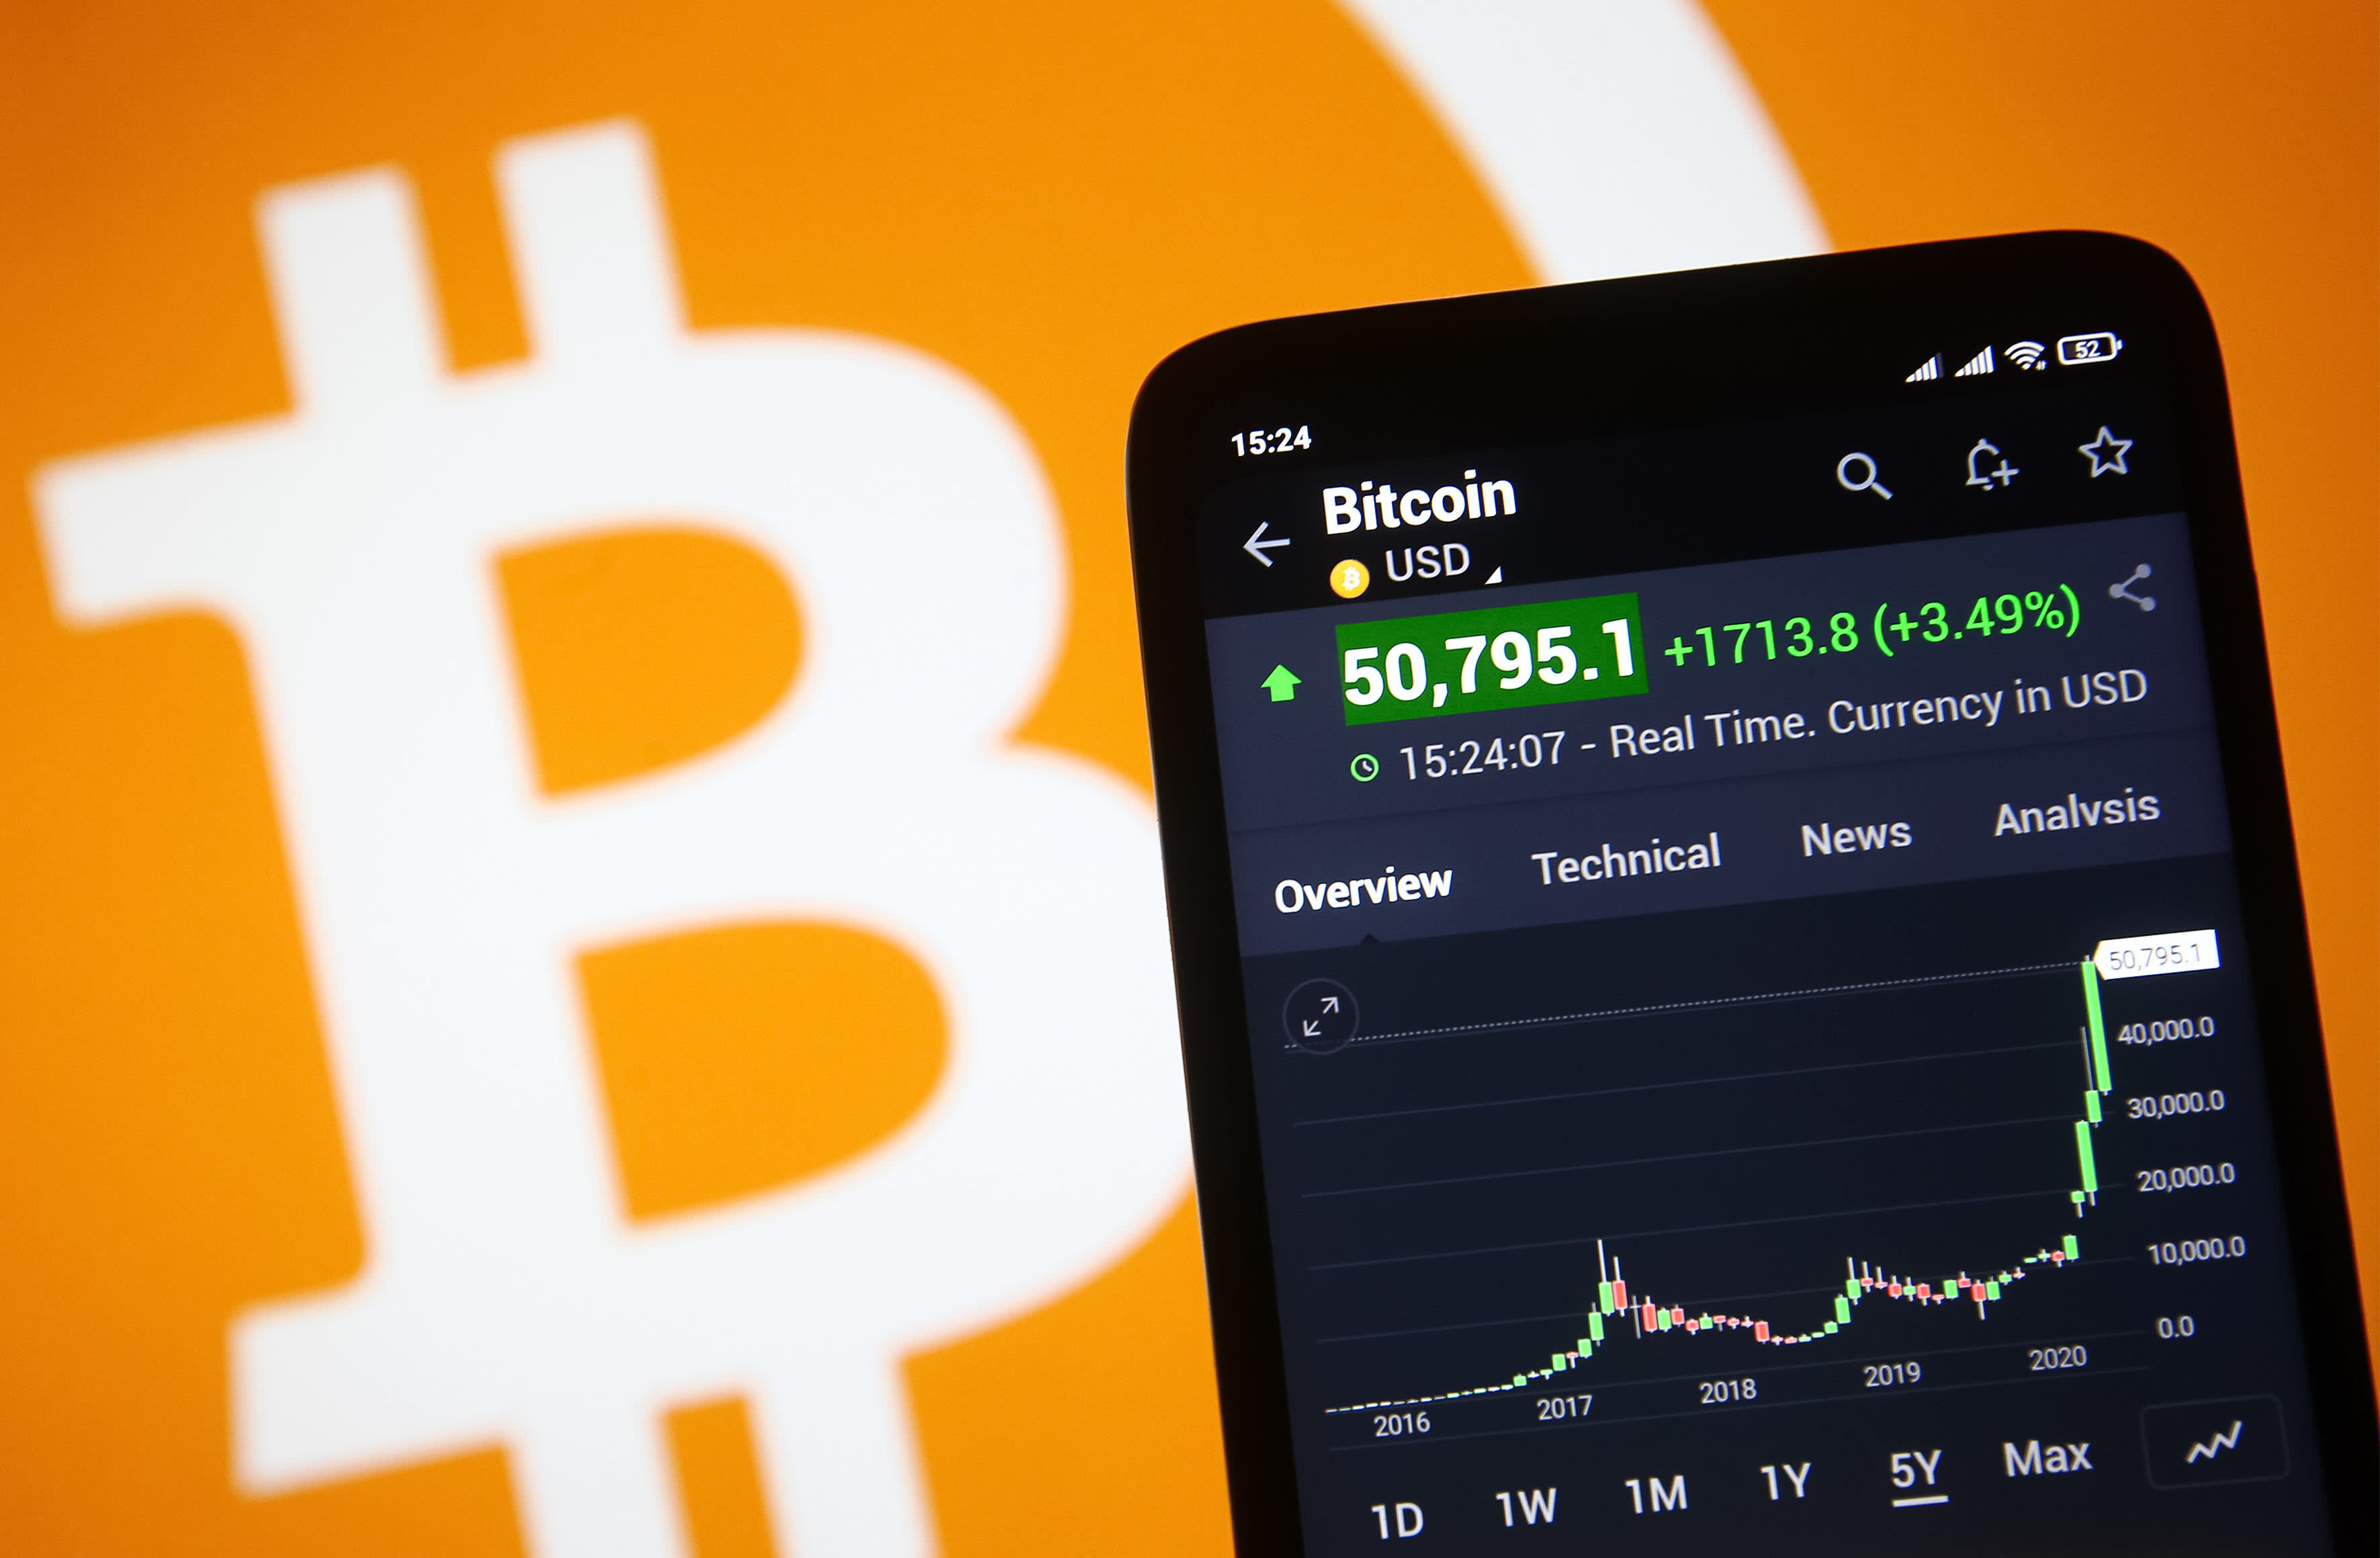 Bitcoin (BTC) rises back to more than $ 50,000 after more purchases at Square